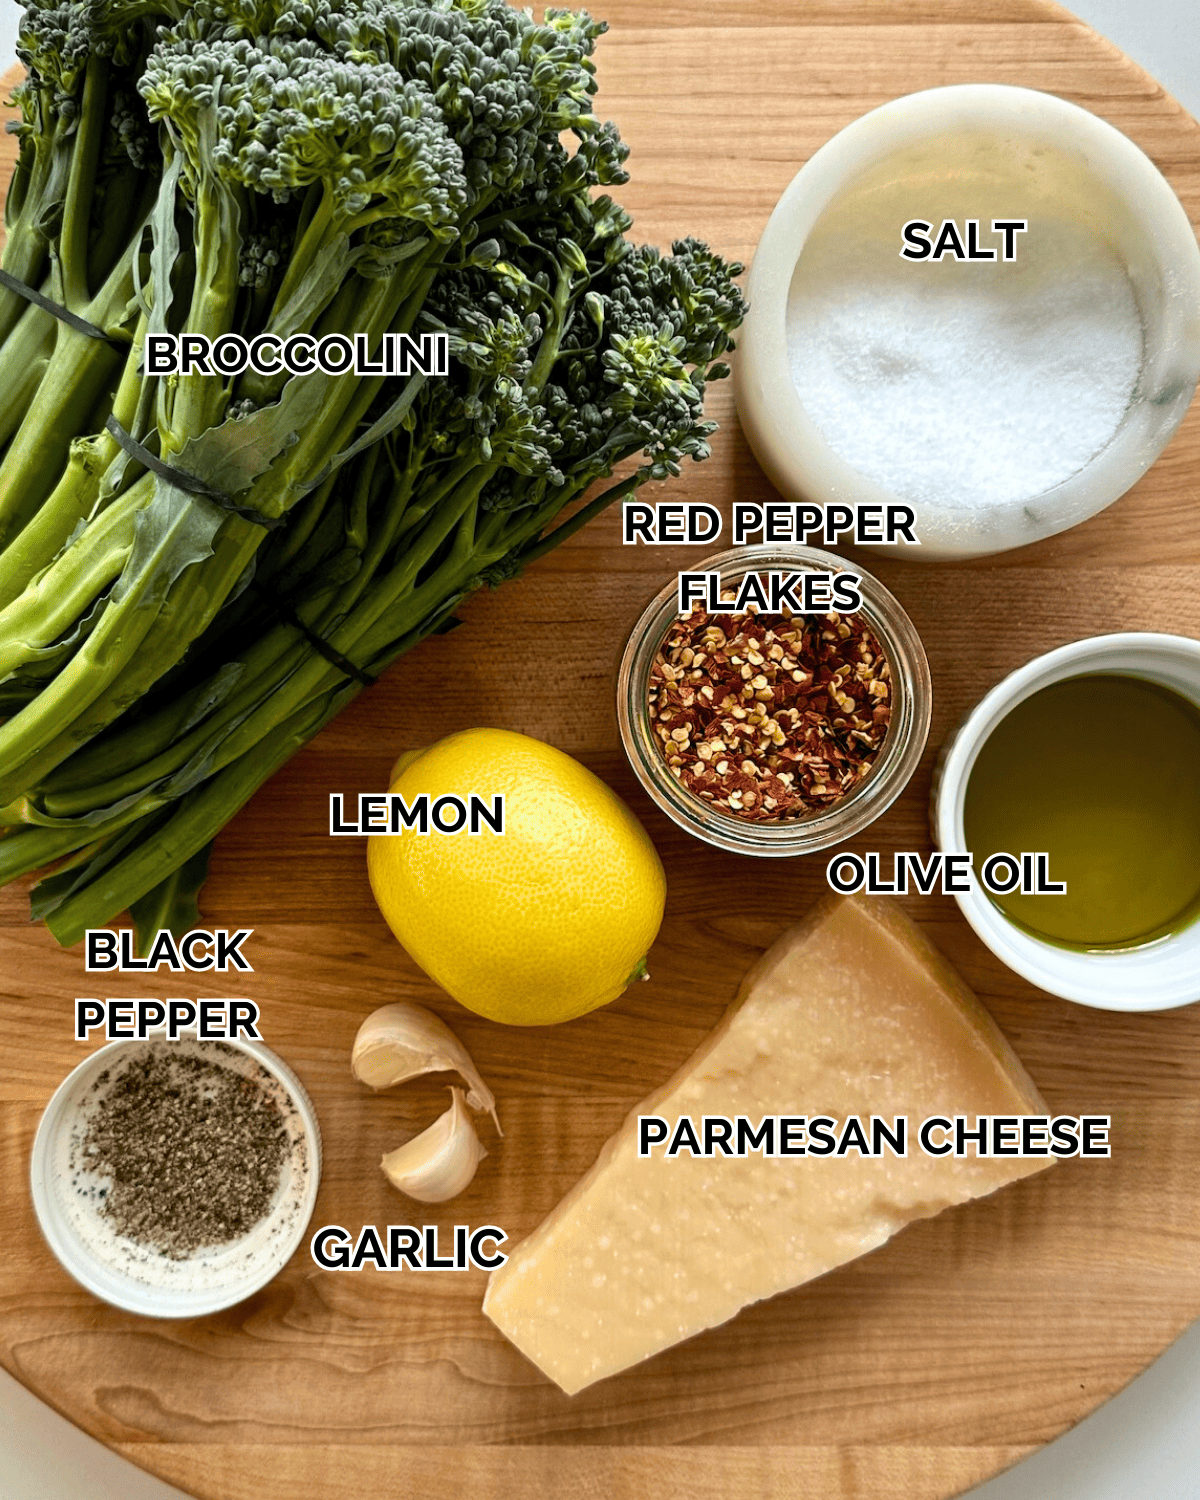 Roasted Broccolini Ingredients: Broccolini, olive oil. salt, pepper, parmesan cheese, garlic cloves, lemon, red pepper flakes all prepped out on a wooden cutting board